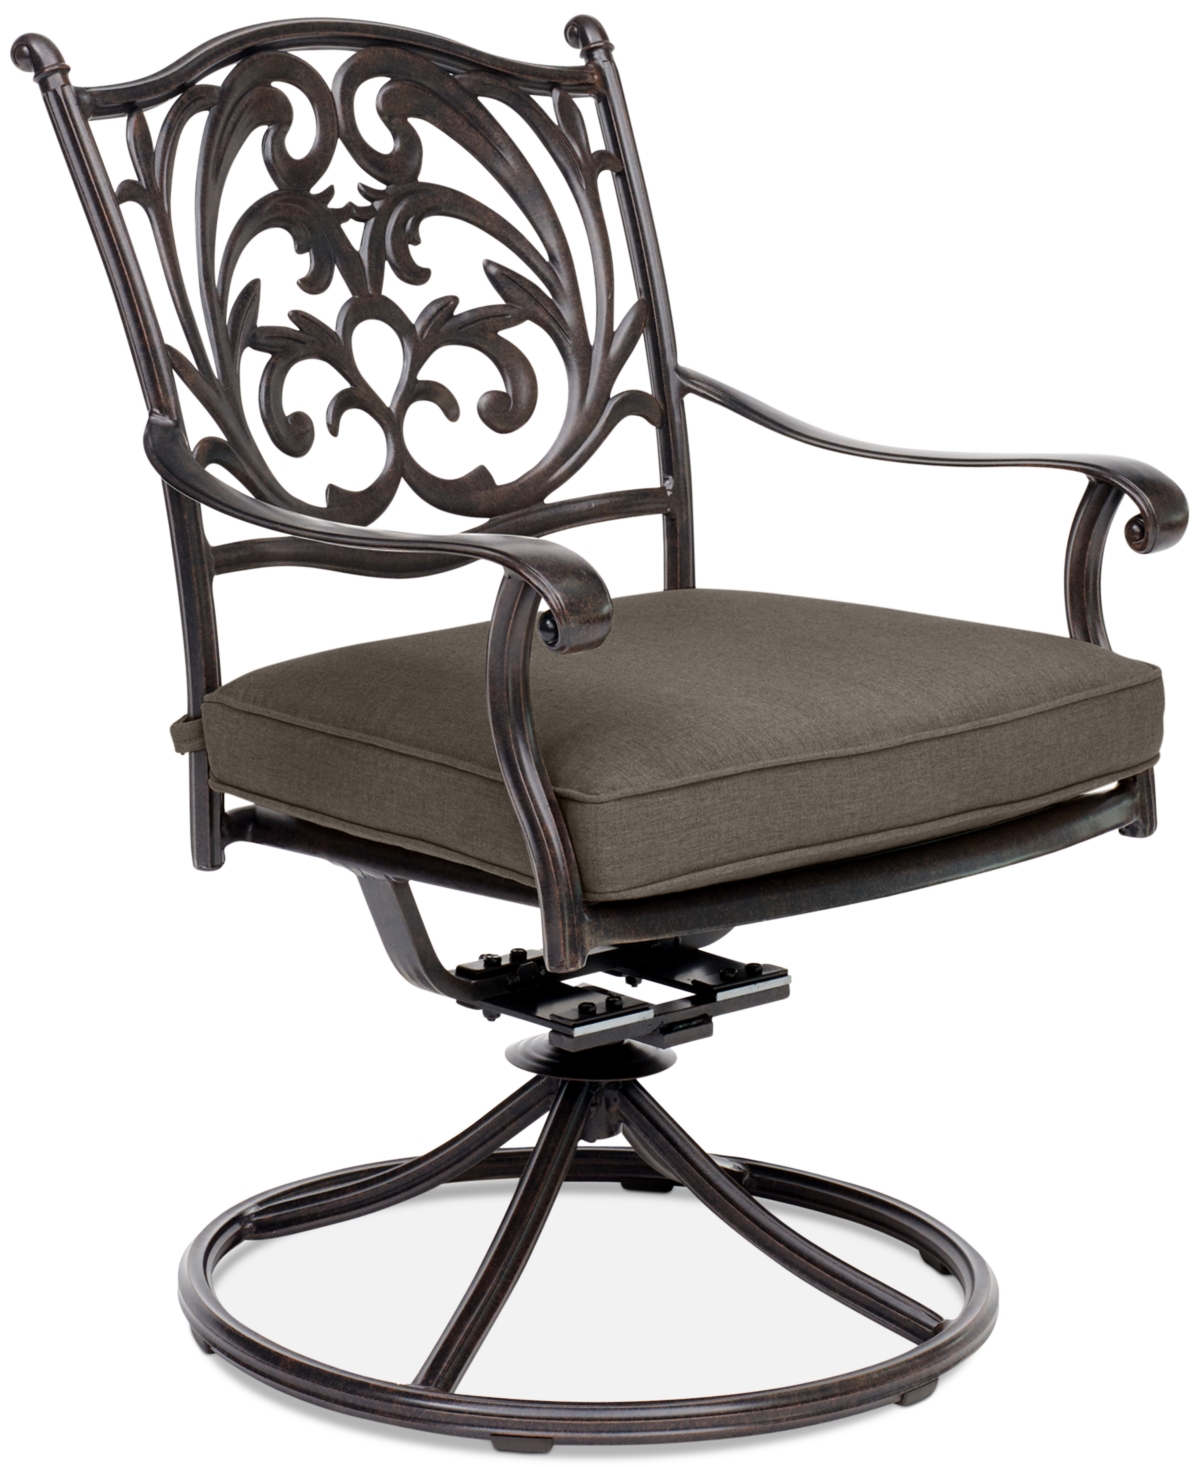 Agio Set Of 4 Chateau Aluminum Outdoor Dining Swivel Rockers With Outdoor Cushion, Created For Macy's In Outdura Storm Steel